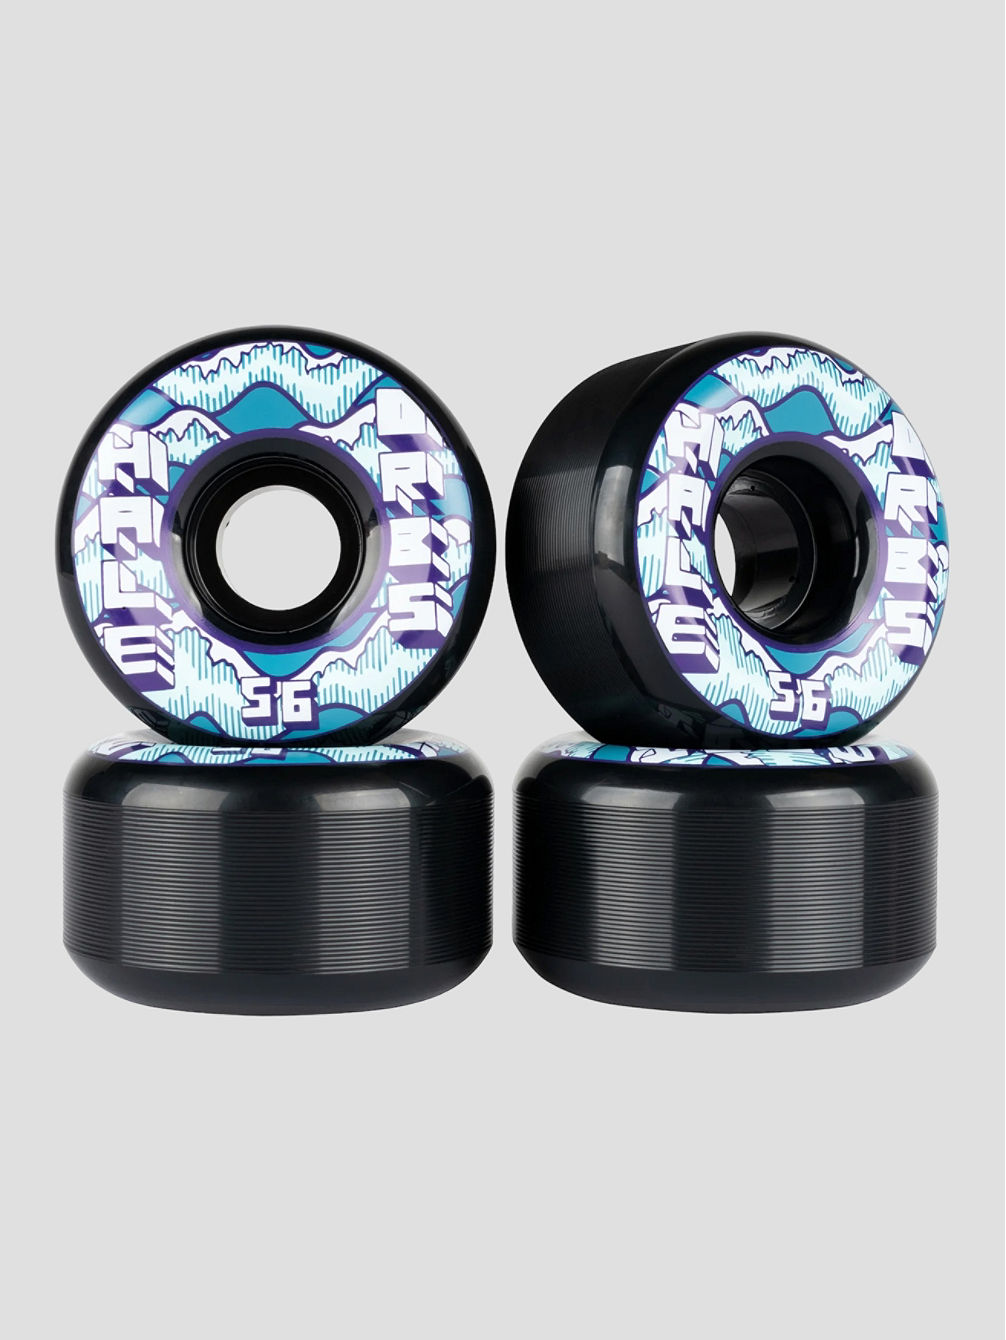 Orbs Shawn Hale Specters Conica 99A 56mm Ruote